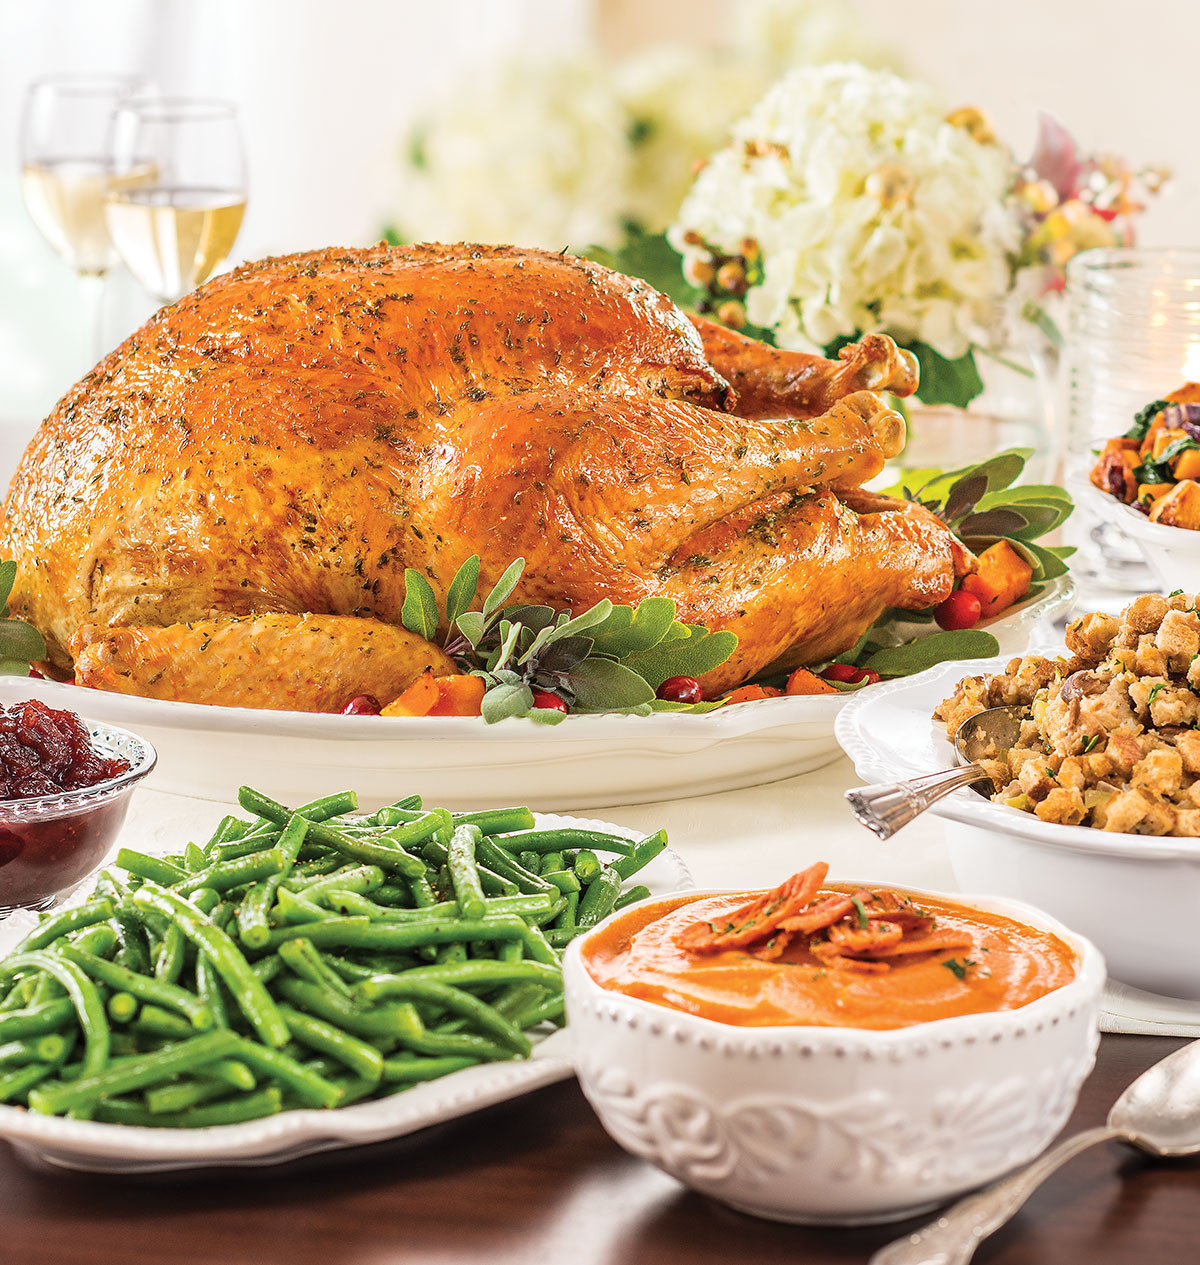 Wegmans Thanksgiving Dinner 2019
 3 Simple Tricks to Prevent Holiday Weight Gain In Your